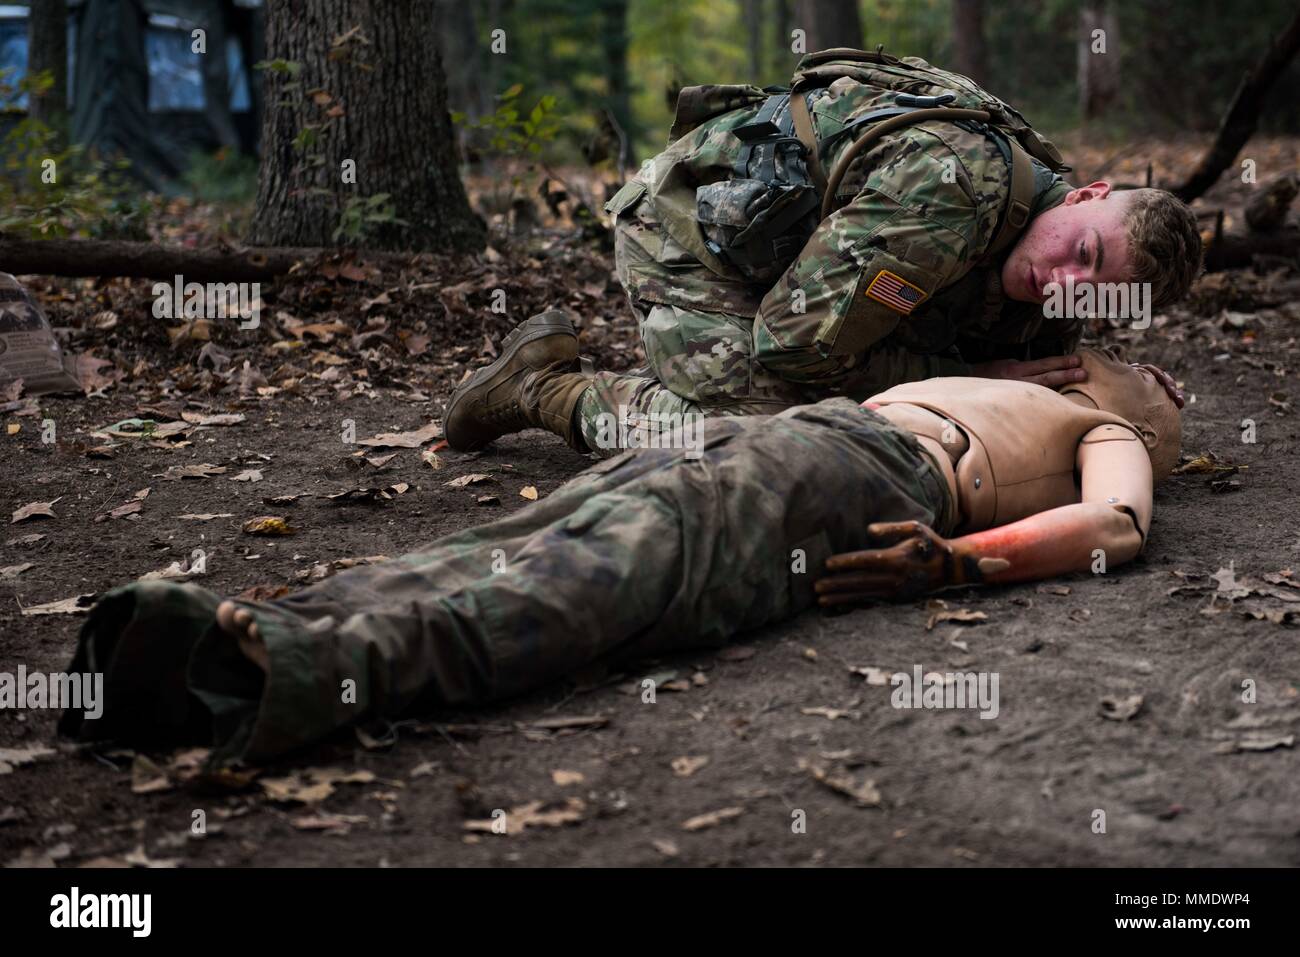 https://c8.alamy.com/comp/MMDWP4/soldiers-assigned-to-the-3d-us-infantry-regiment-the-old-guard-participate-in-medical-and-weapon-proficiency-training-for-the-expert-infantryman-badge-eib-on-fort-ap-hill-va-oct-23-2017-first-aid-and-weapon-proficiency-are-just-two-of-a-number-of-skills-infantryman-must-perfect-in-order-to-earn-their-expert-infantryman-badge-other-skills-include-day-and-night-land-navigation-patrol-lane-tasks-moving-under-direct-fire-and-a-12-mile-foot-march-MMDWP4.jpg